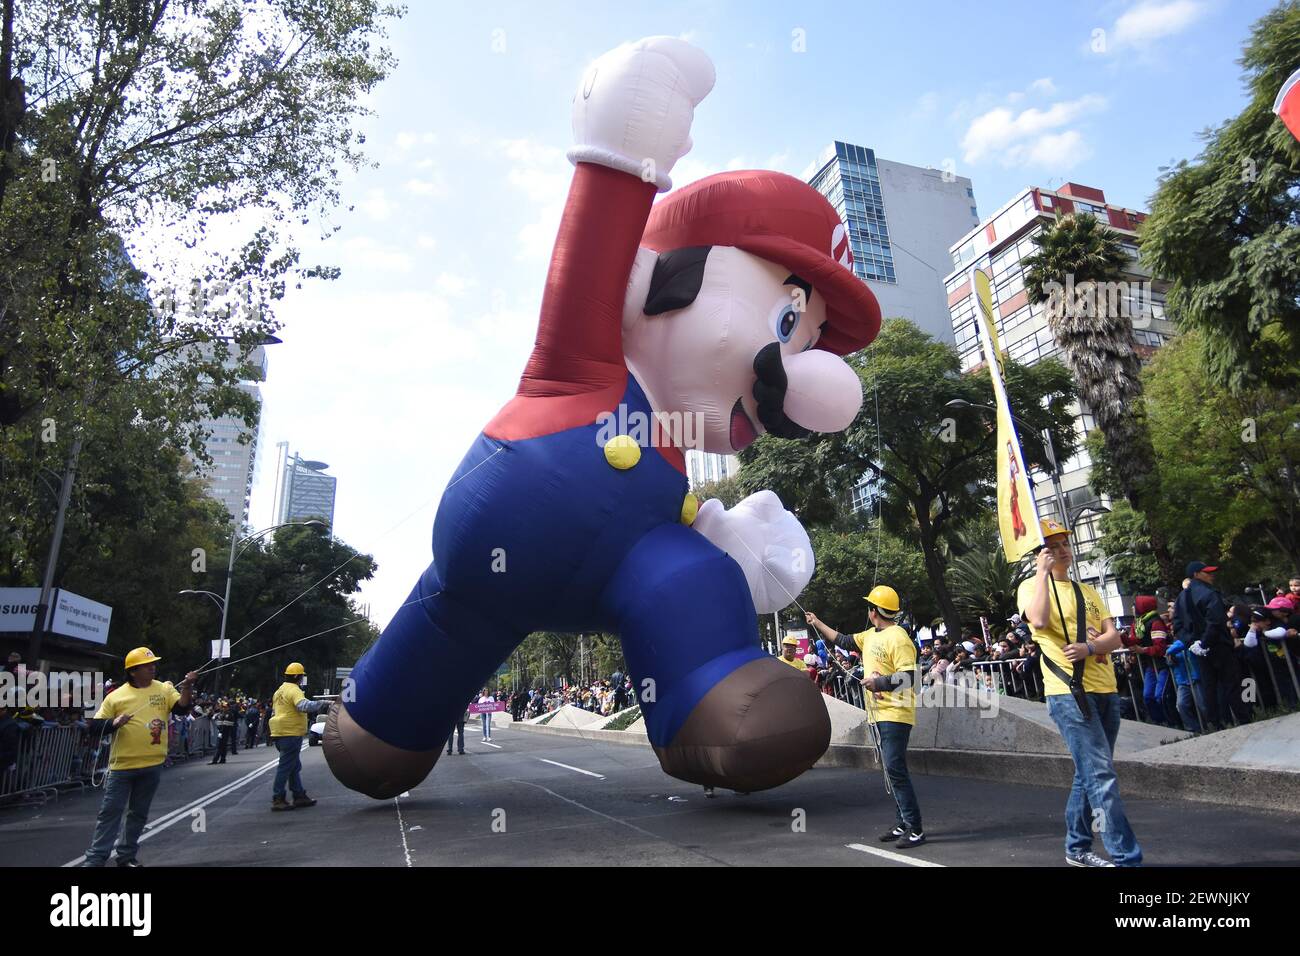 valgfri Mose Recite Balloons of Mario Bross is seen during Bolo Fest Parade 2016 at Reforma  Avenue on November